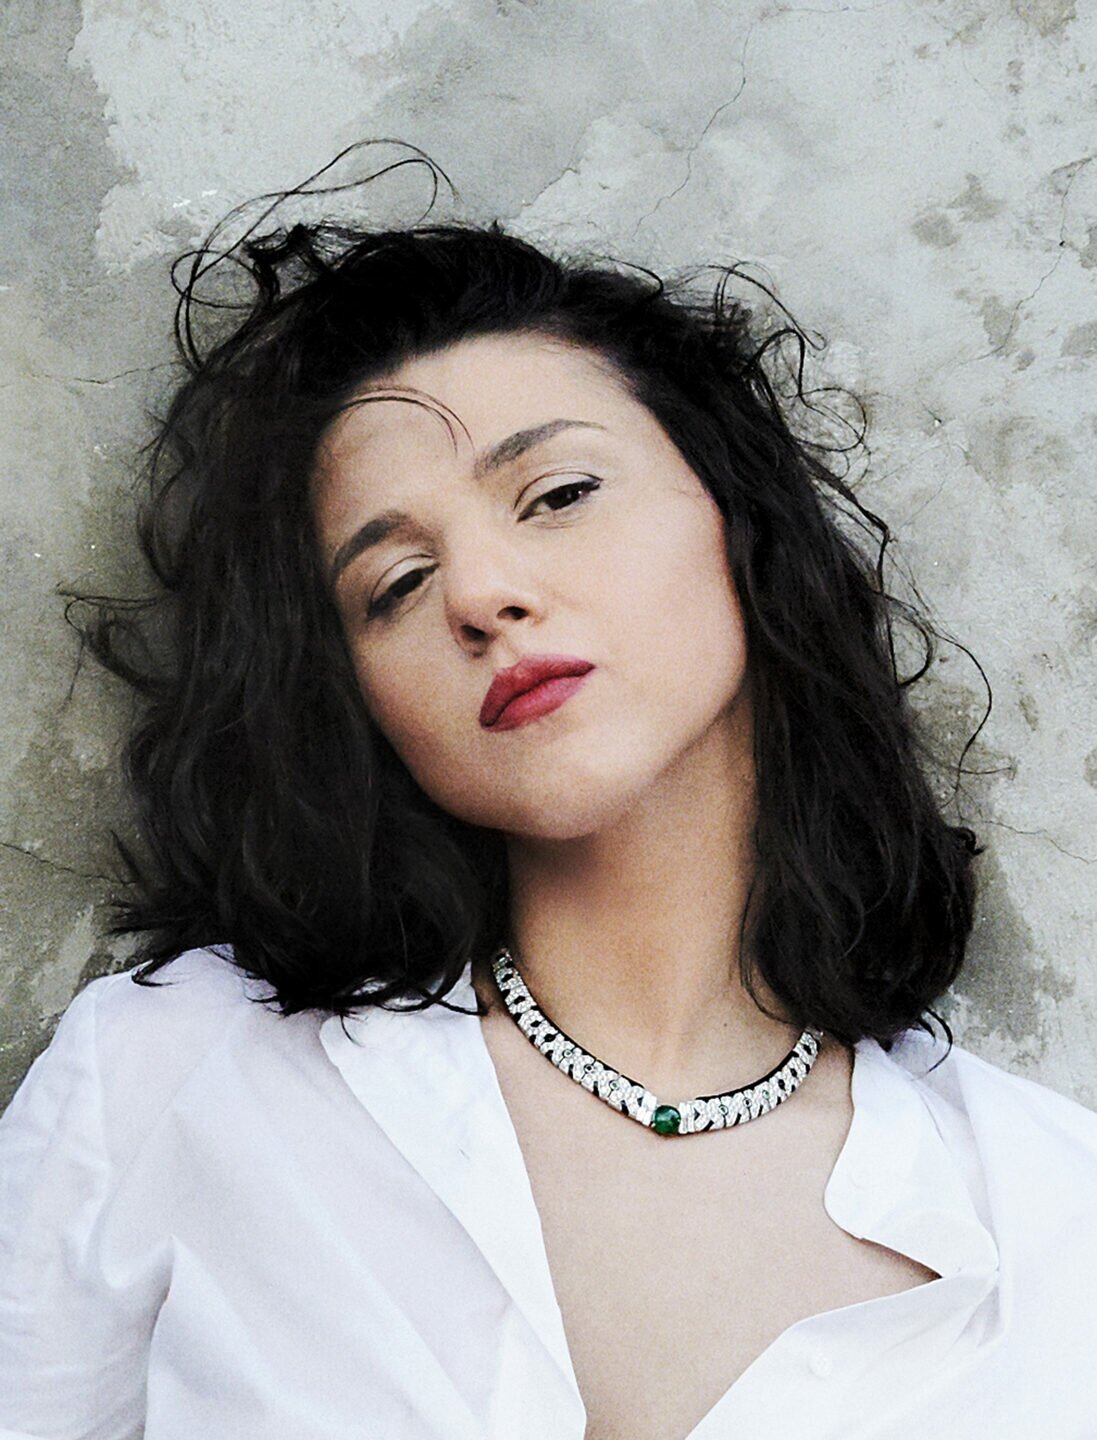 When It Comes To Music And Advocacy, Khatia Buniatishvili Doesn’t Hold Back